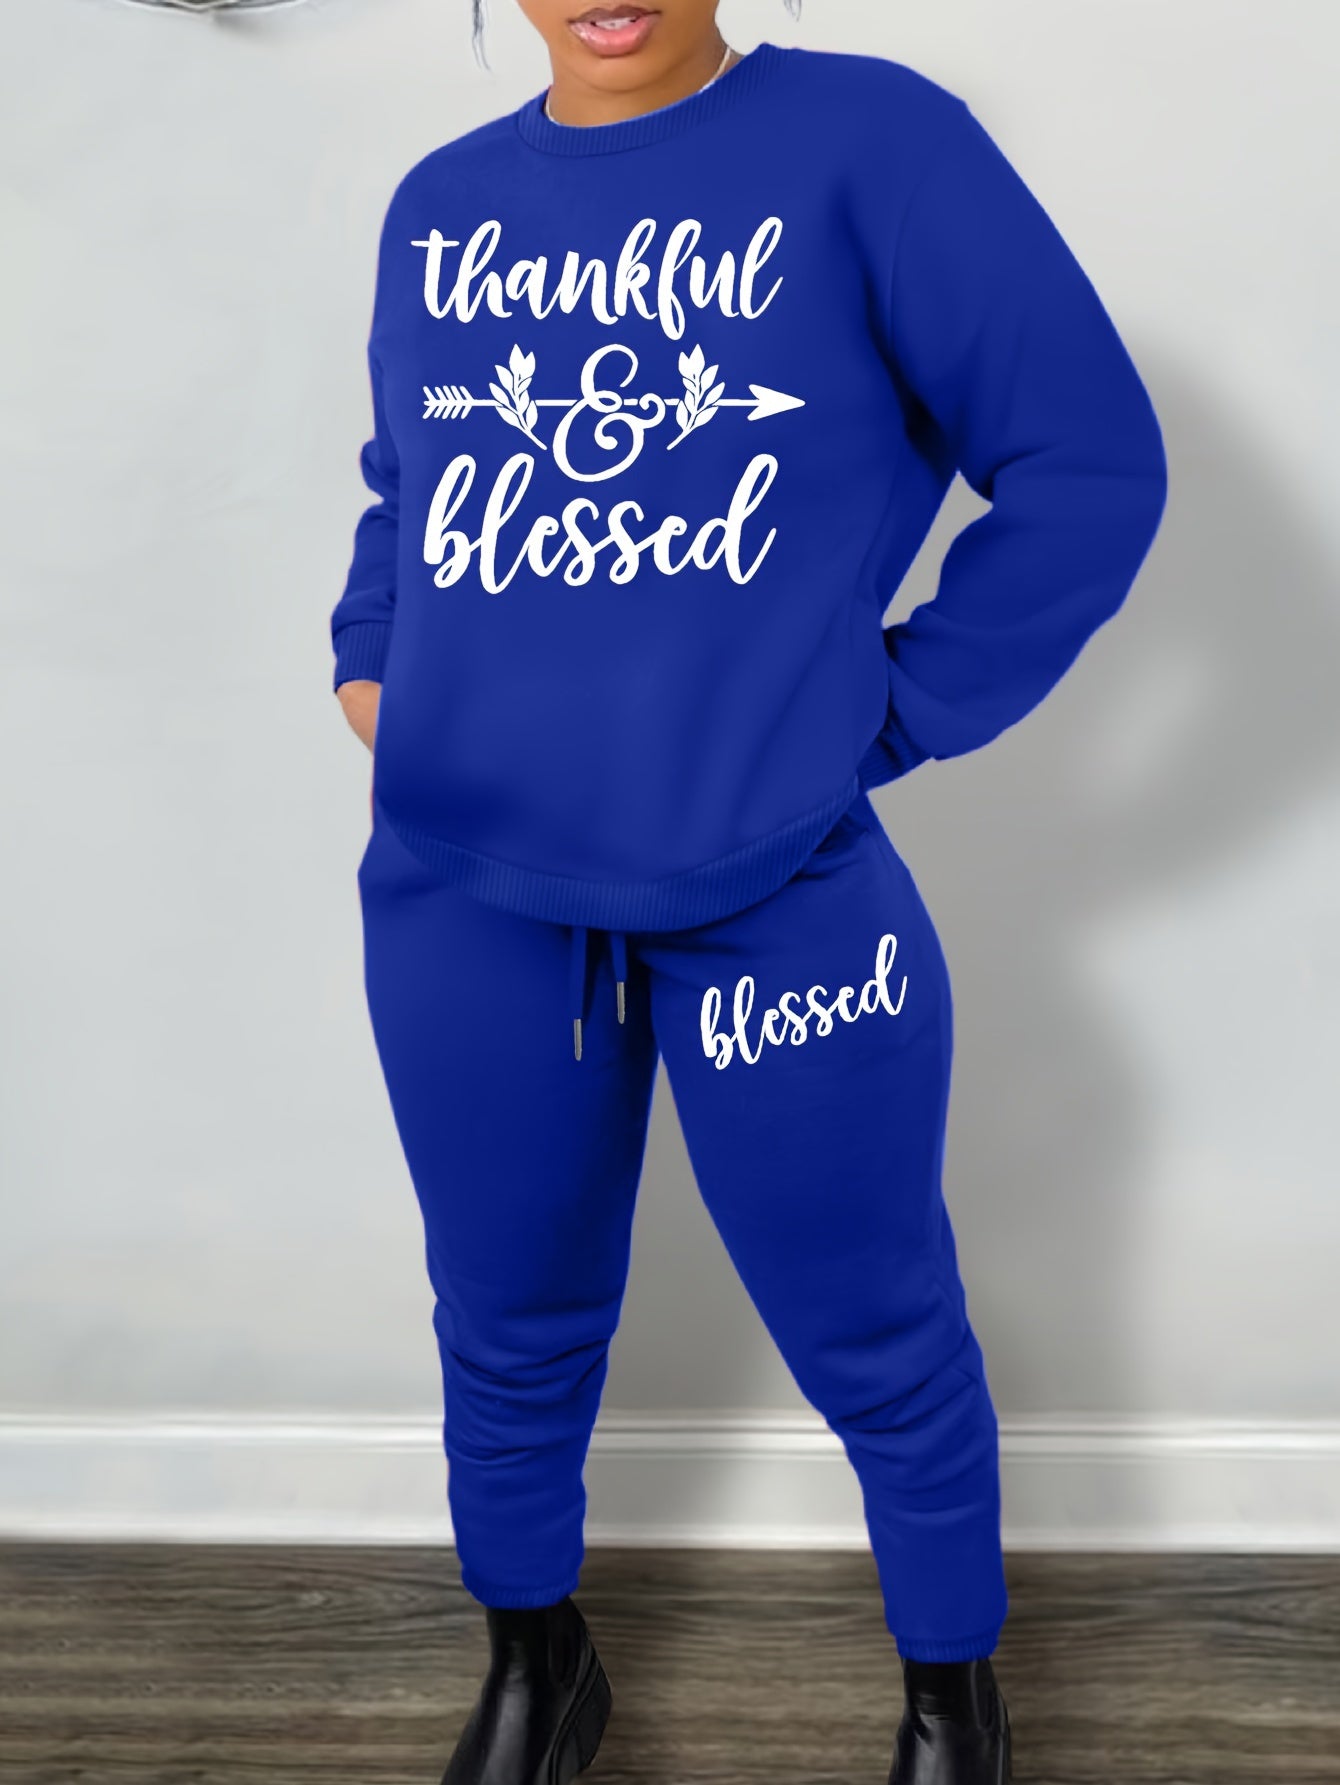 Thankful & Blessed Women's Christian Casual Outfit claimedbygoddesigns